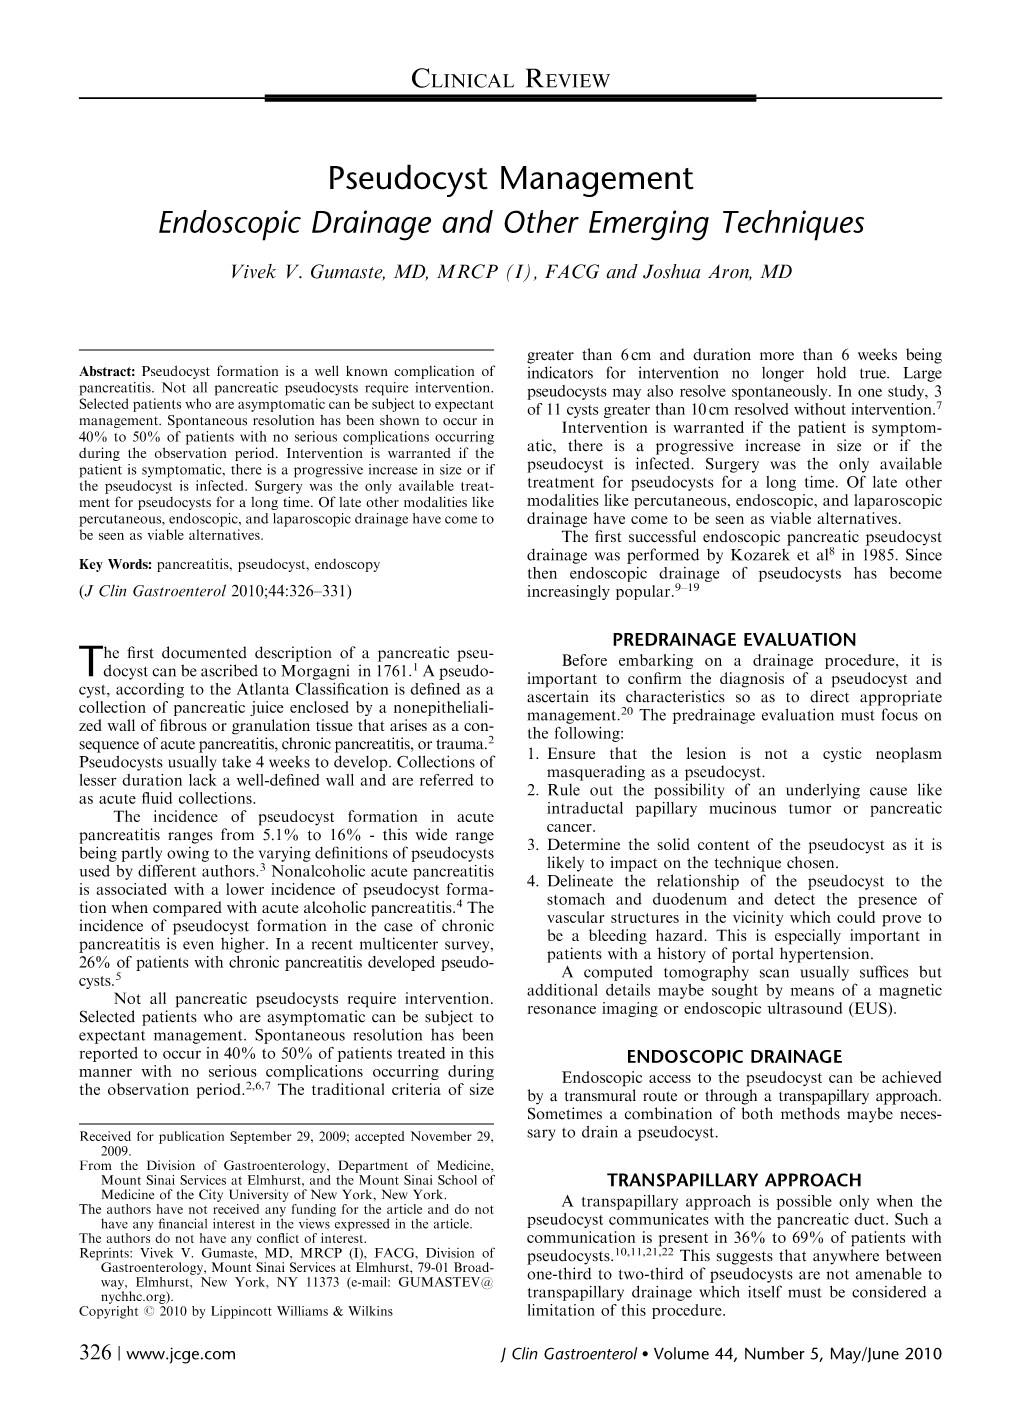 Pseudocyst Management Endoscopic Drainage and Other Emerging Techniques